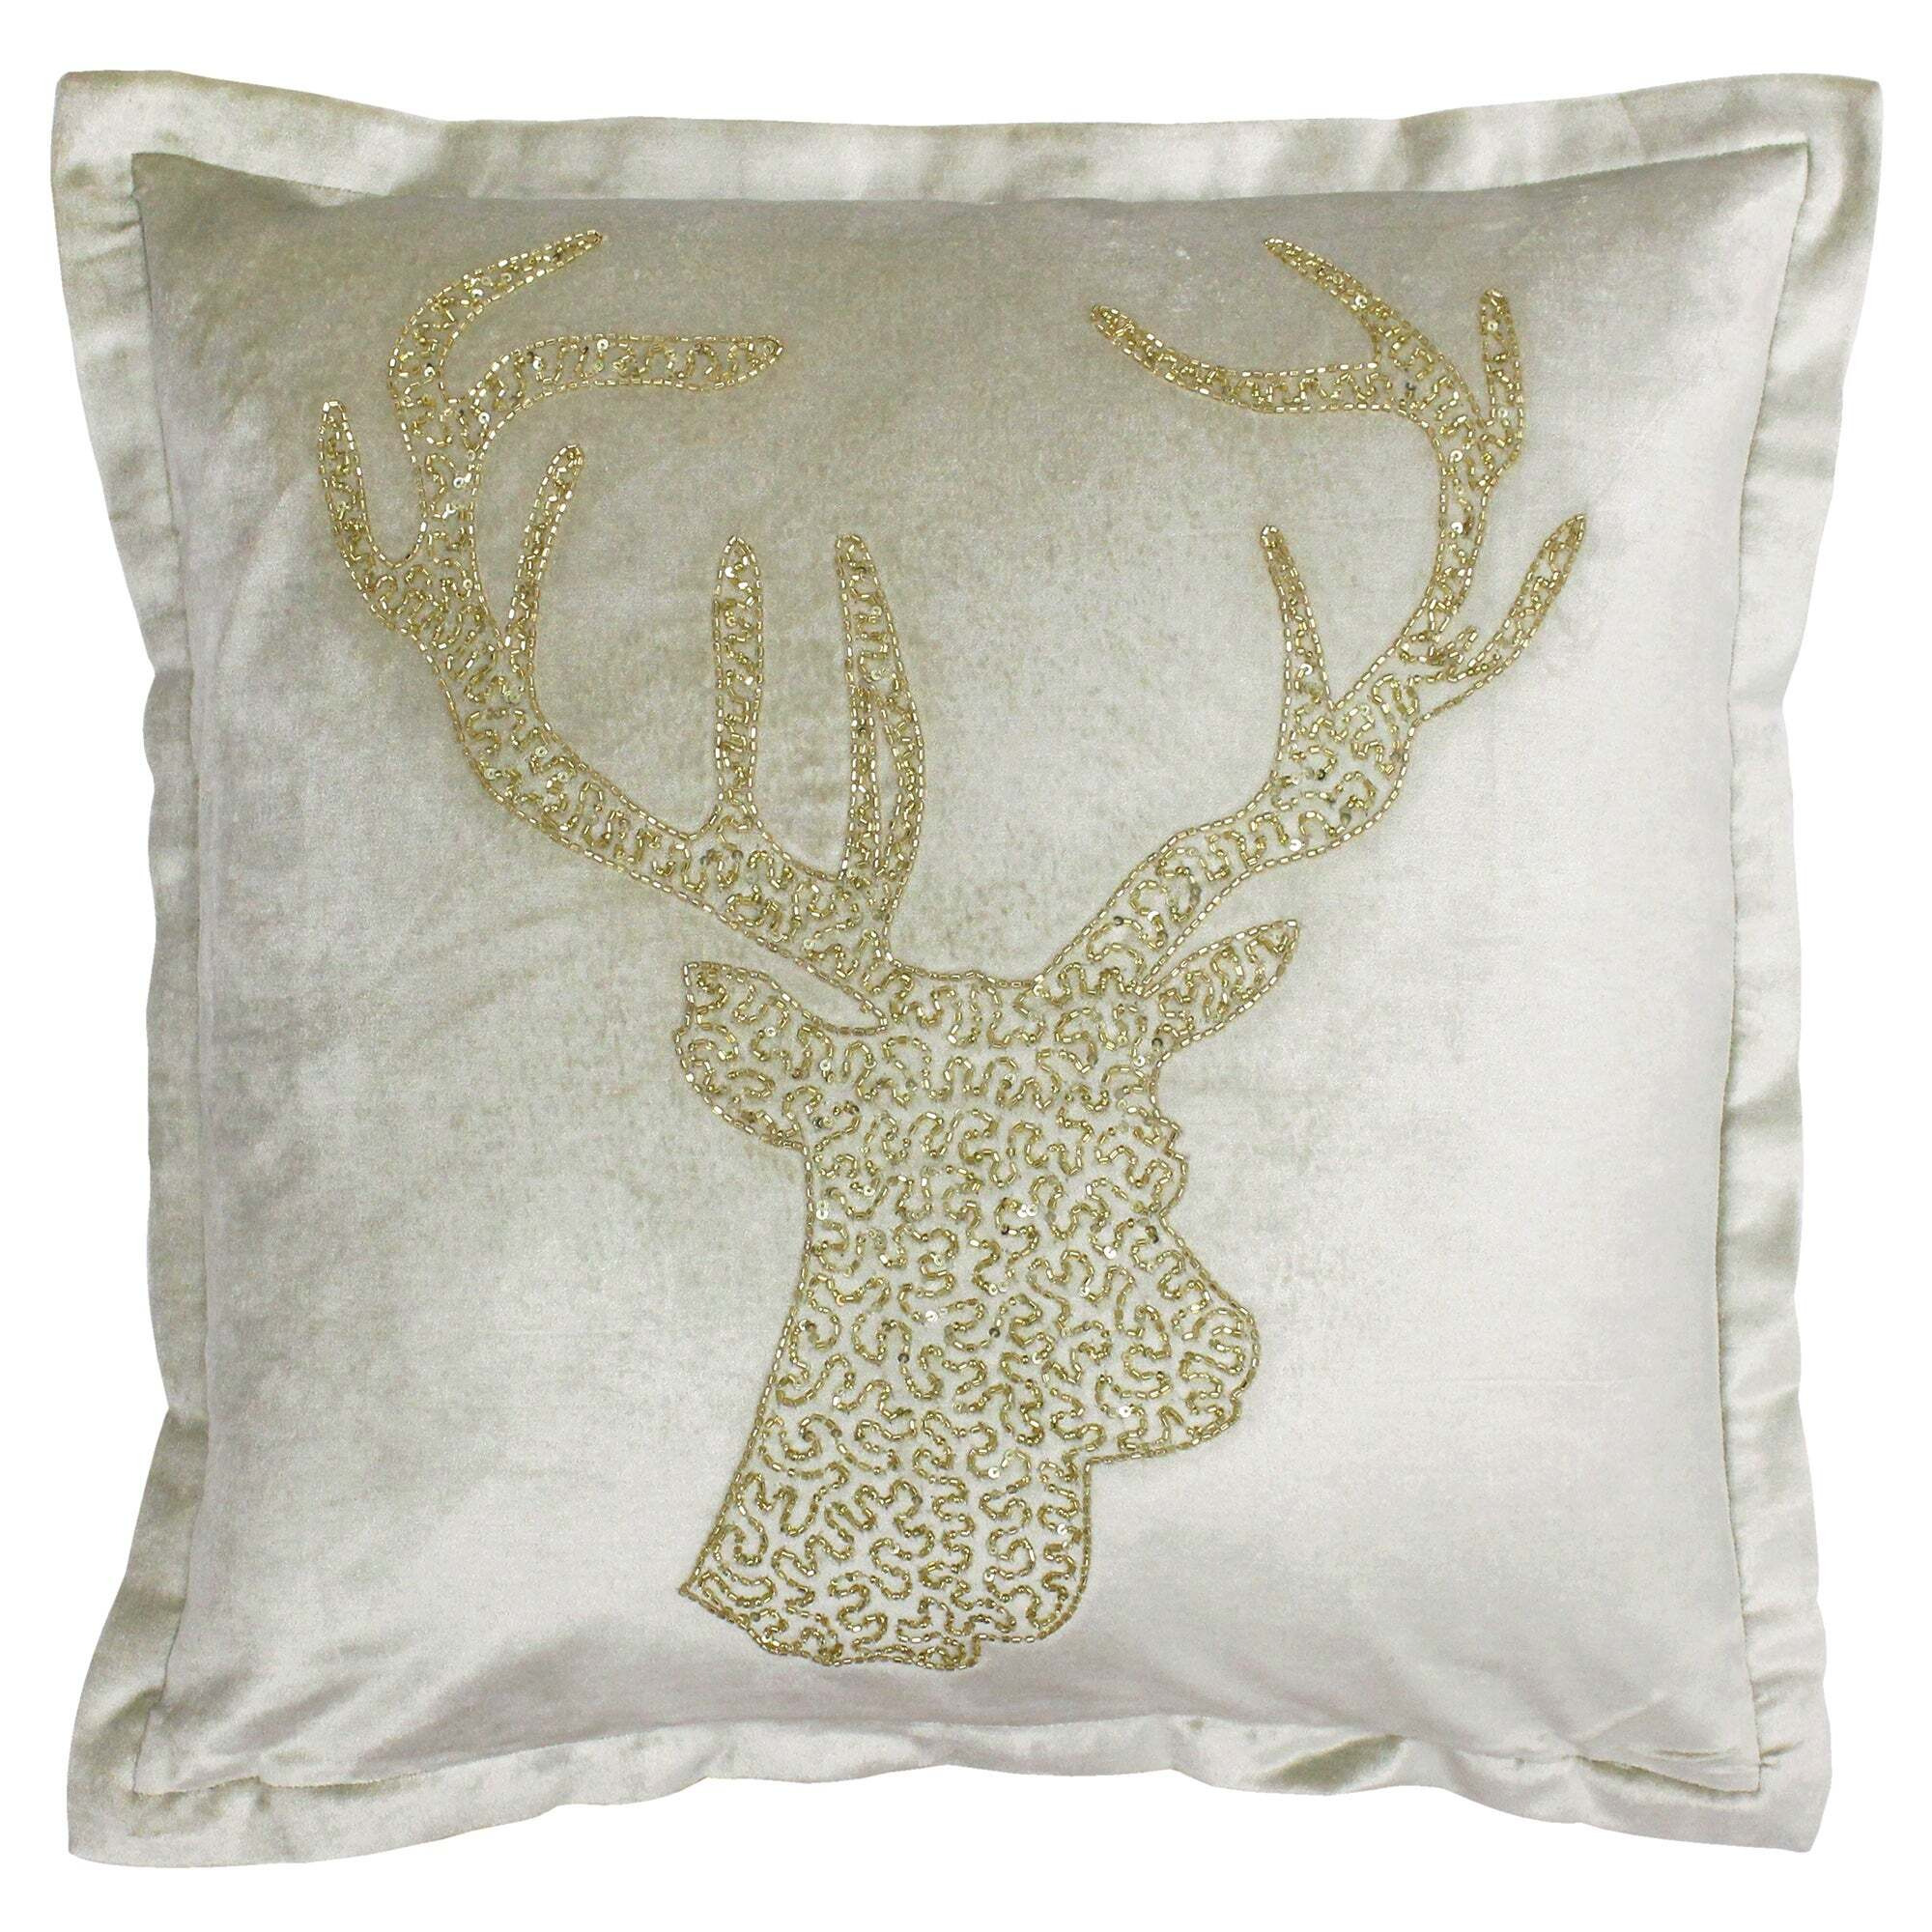 Wonderland Stag Champagne Cushion Green and Gold